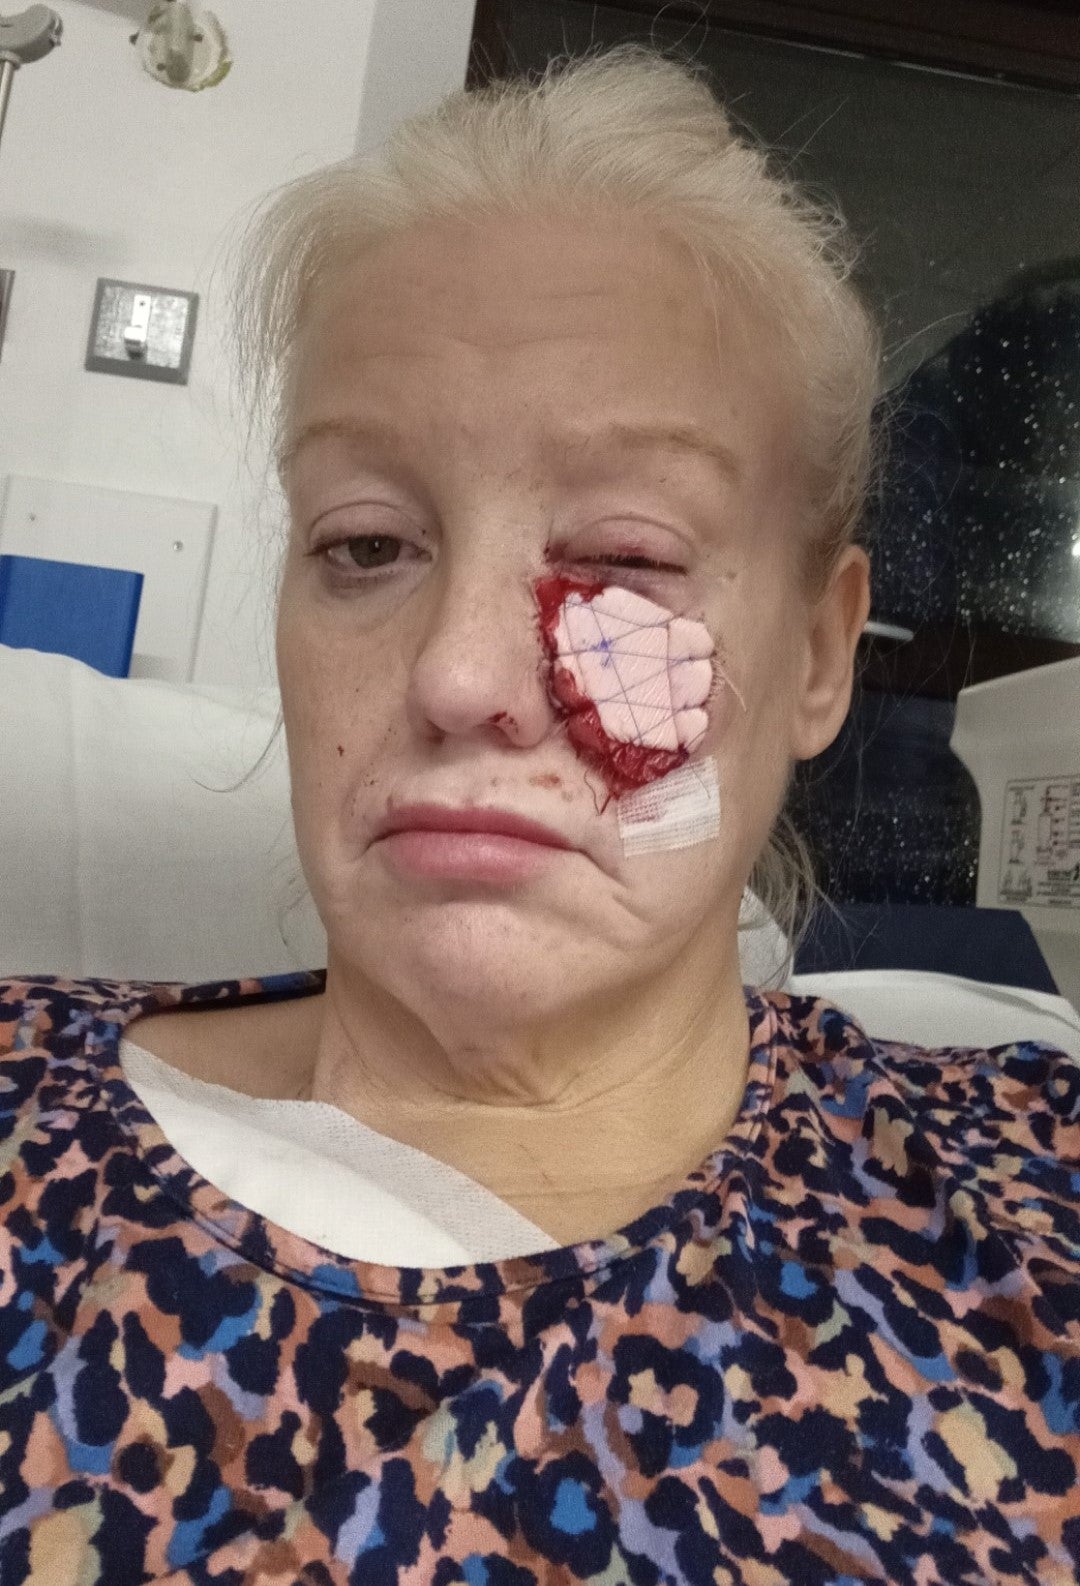 Kelly woke up in hospital after her operation with a bandage stitched to her face